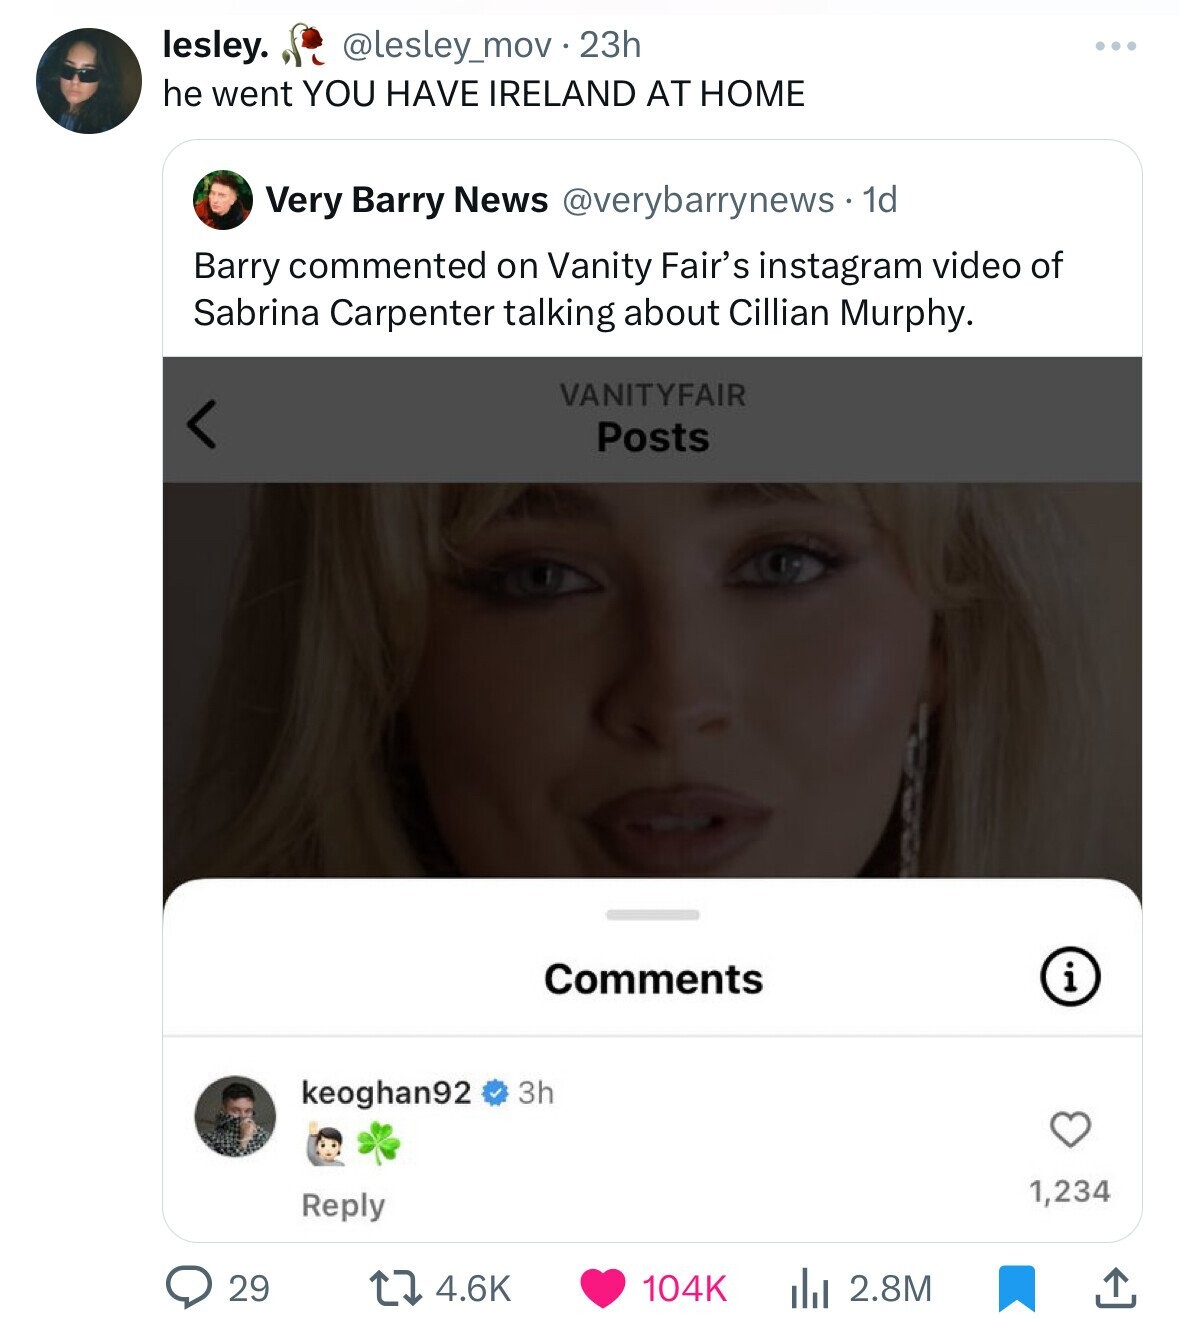 screenshot - lesley. 23h he went You Have Ireland At Home Very Barry News . 1d Barry commented on Vanity Fair's instagram video of Sabrina Carpenter talking about Cillian Murphy. Vanityfair Posts 29 keoghan92 3h i 1,234 lil 2.8M